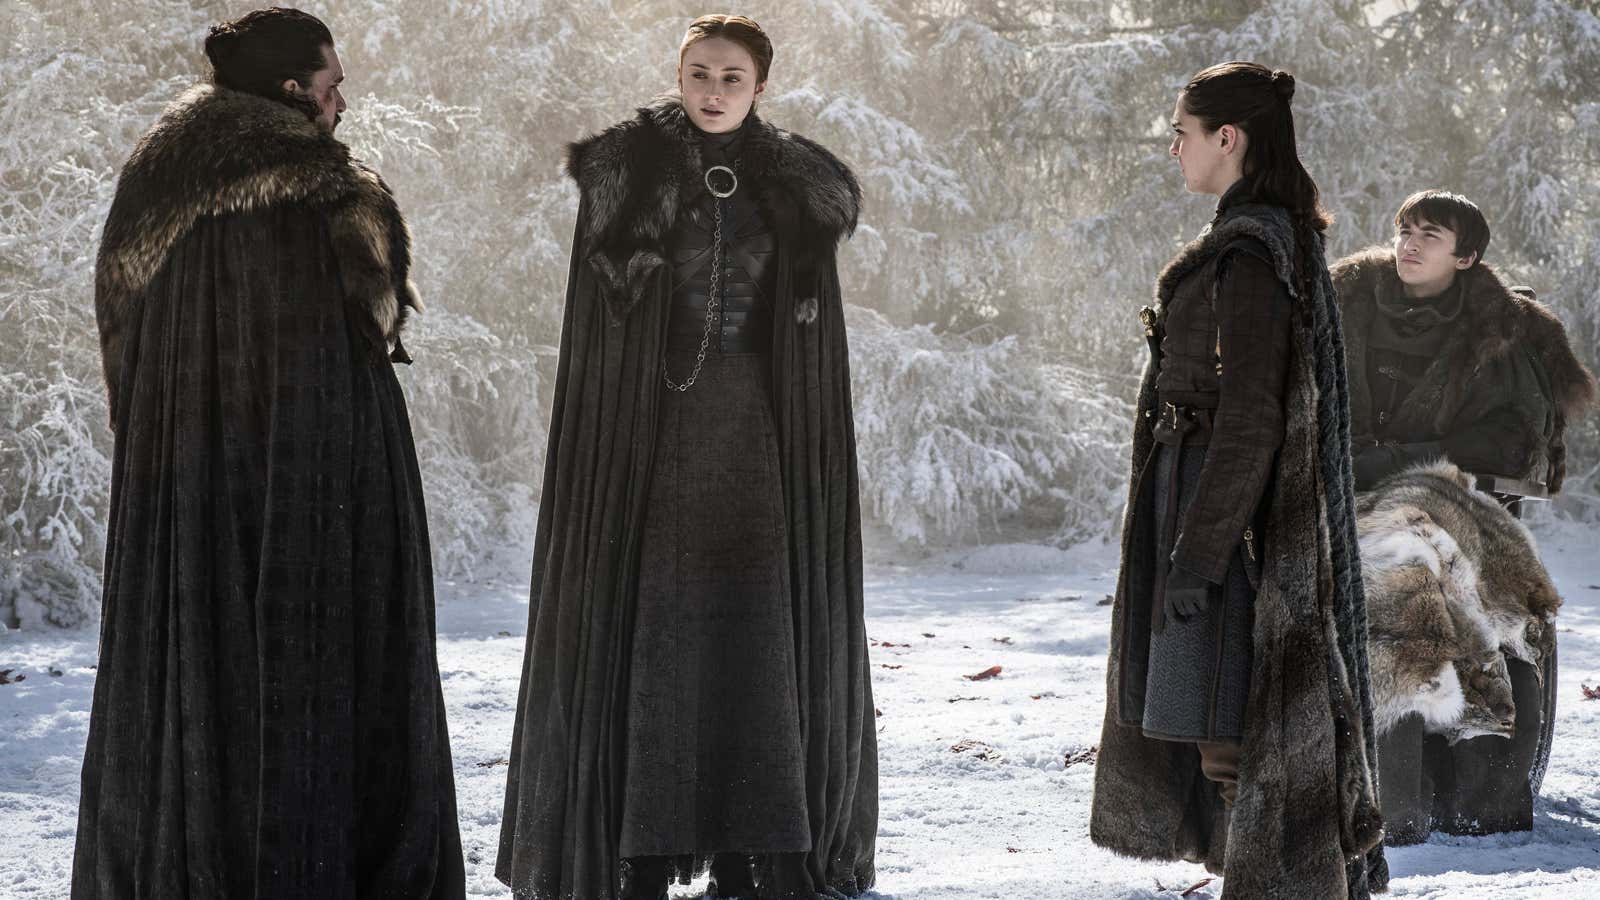 Which character would actually be the most effective ruler of Westeros?